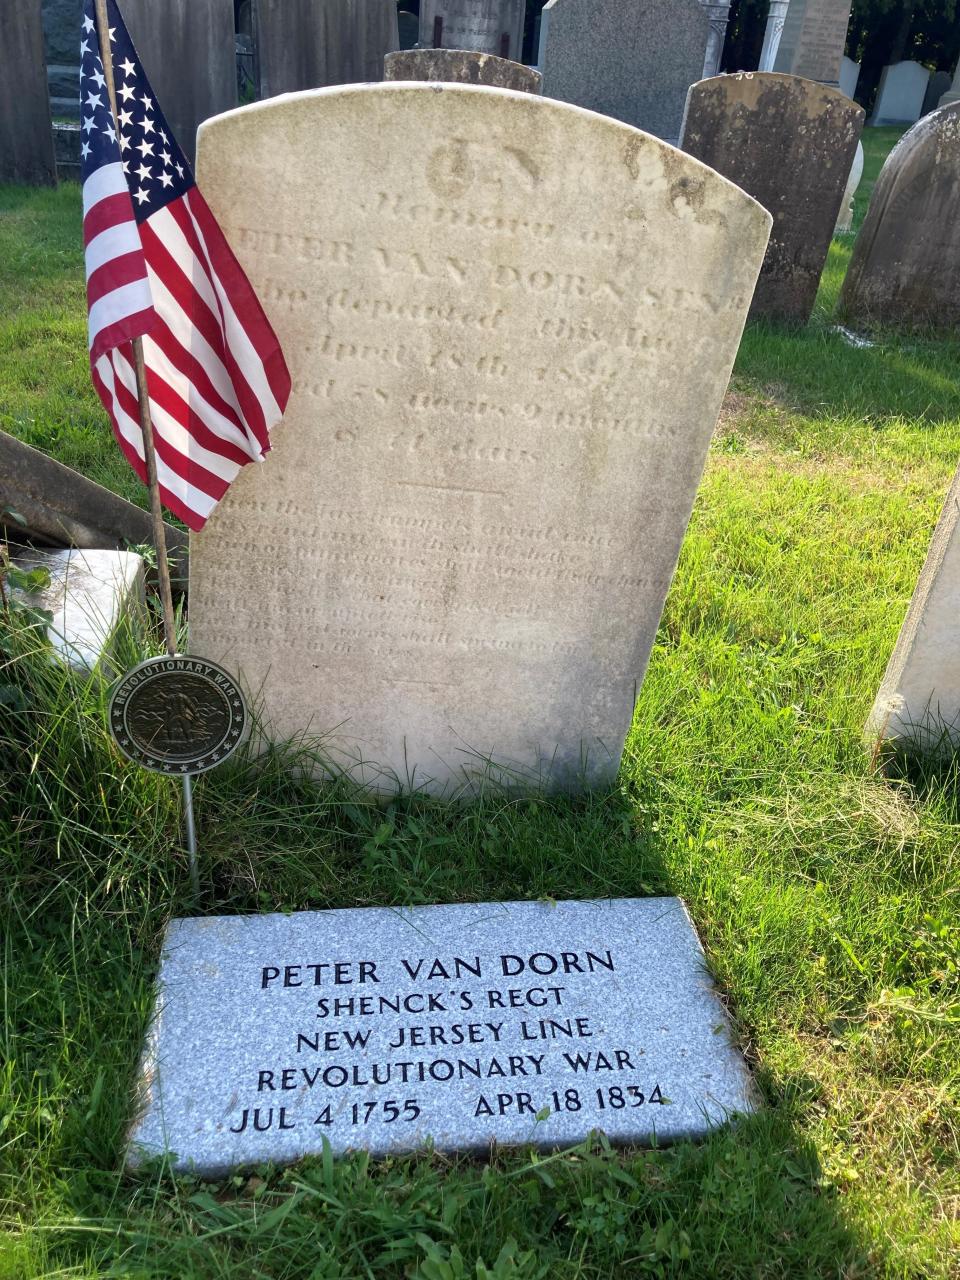 Peter Van Dorn's cleaned and marked grave at Old Brick Reformed Church in Marlboro.